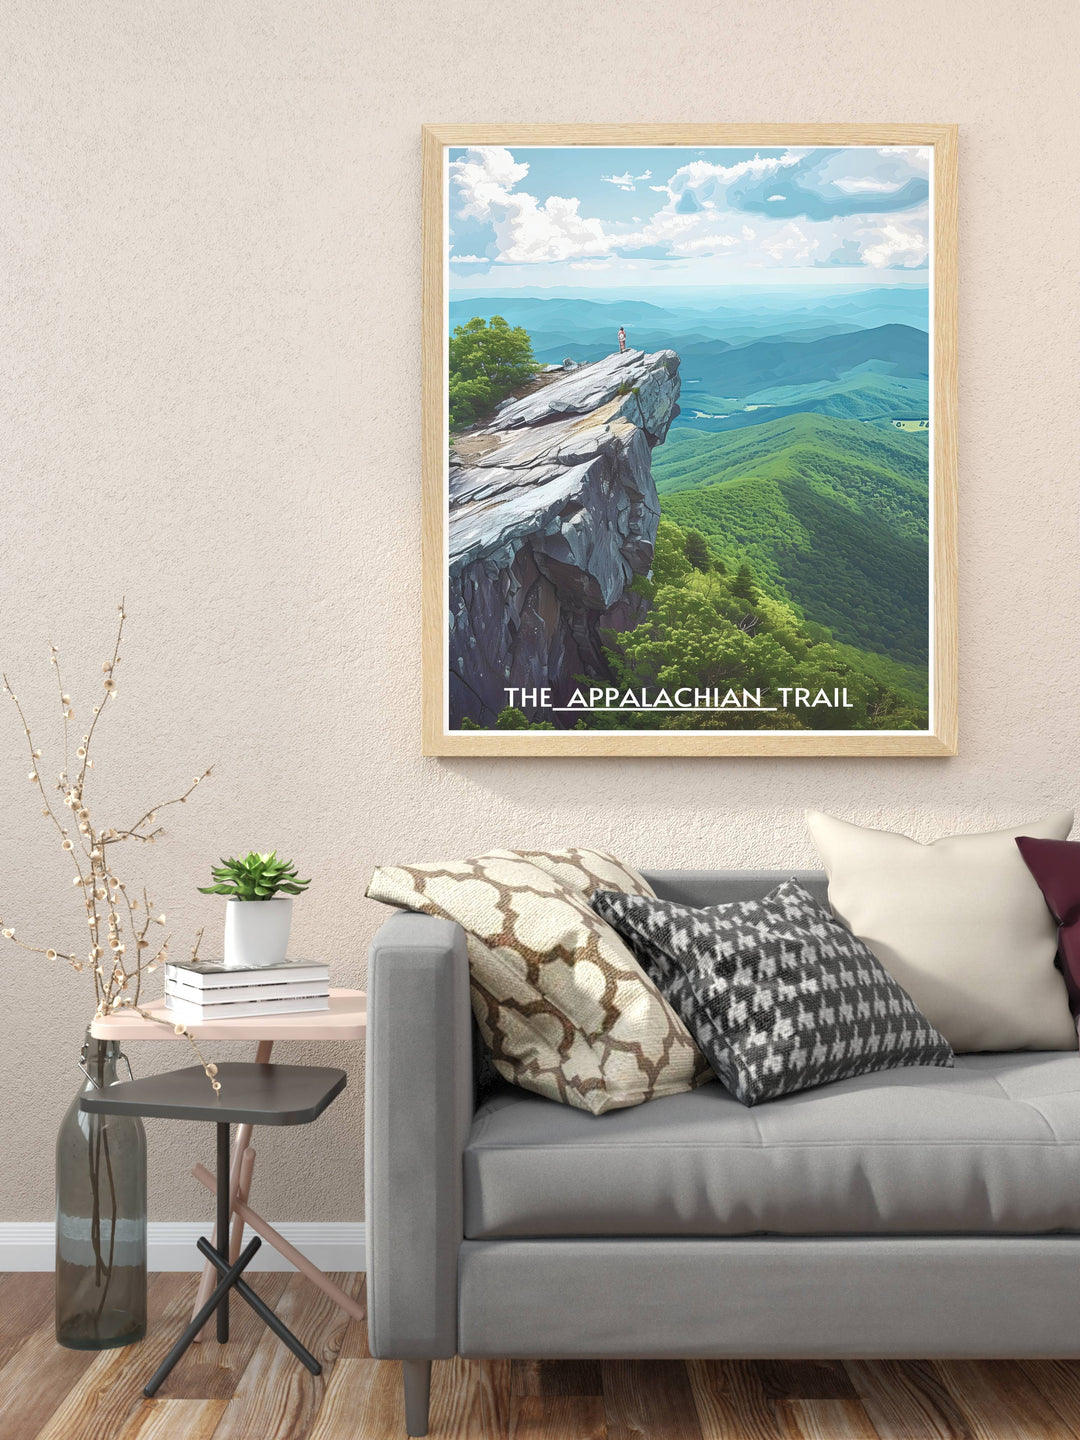 Mcafee Knob landscape print, showing the rugged terrain and lush greenery of the Appalachian Trail, a hiker's dream.